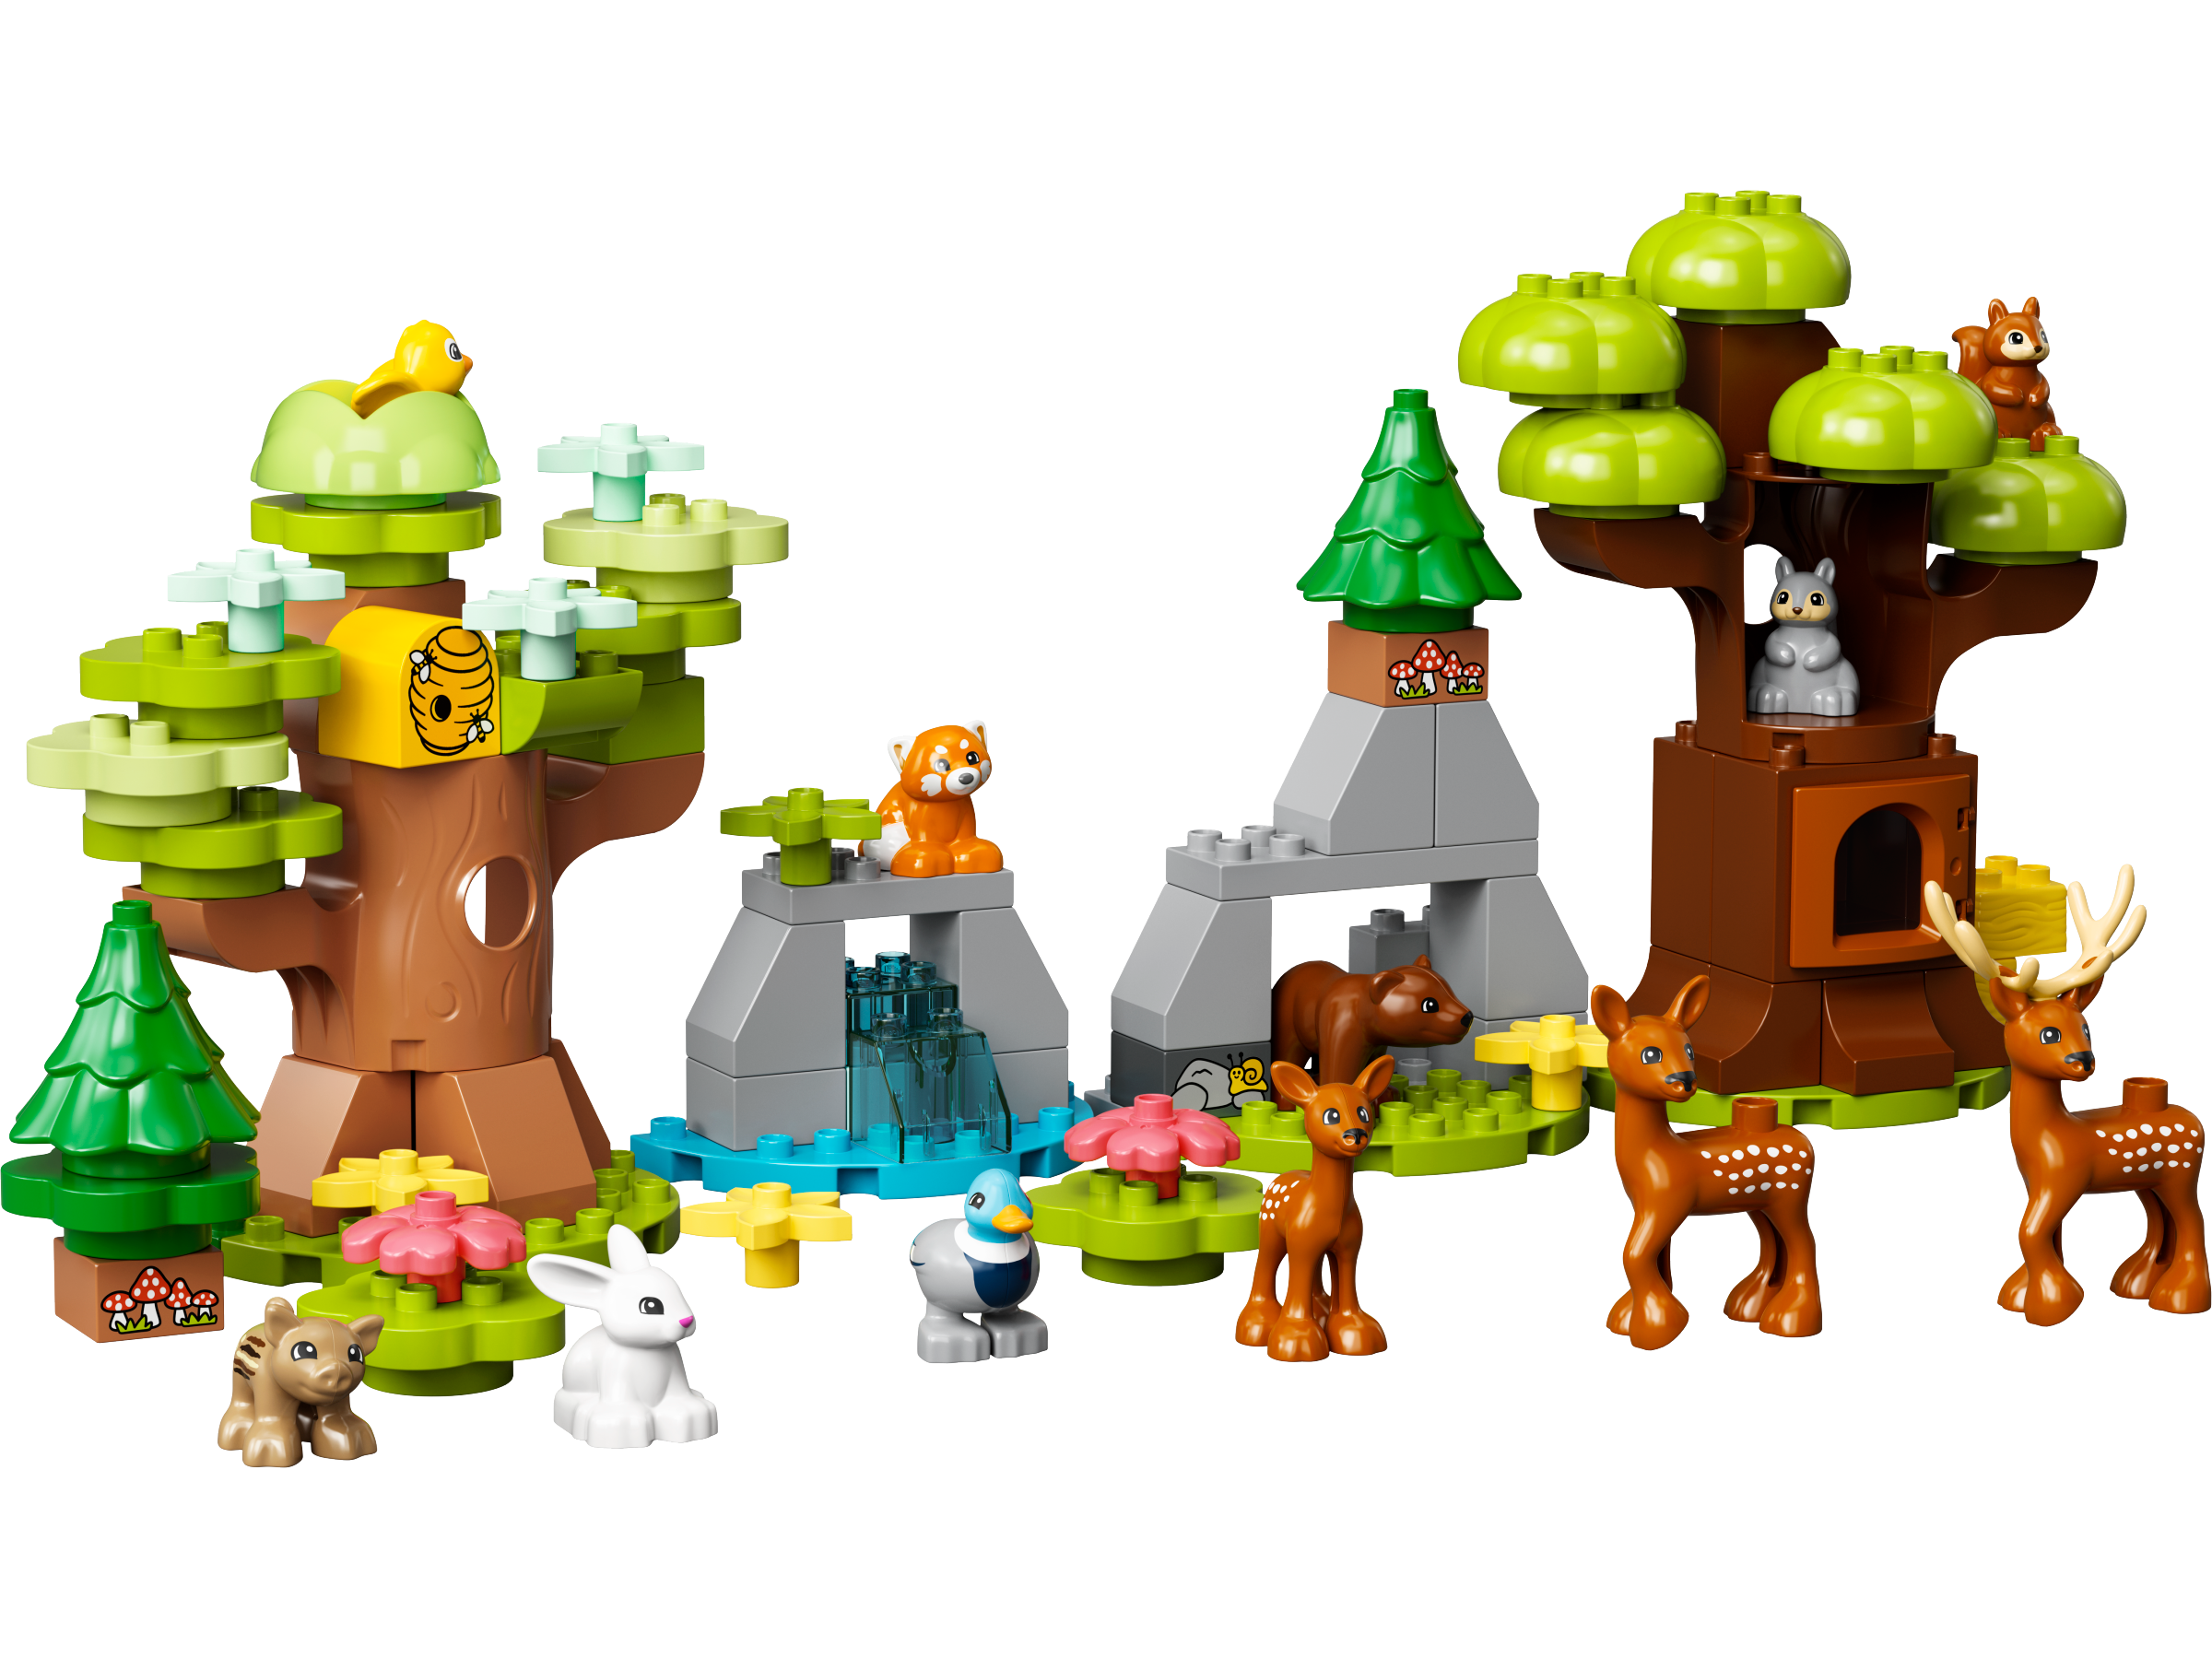 Duplo® - Animaux - Brault & Bouthillier